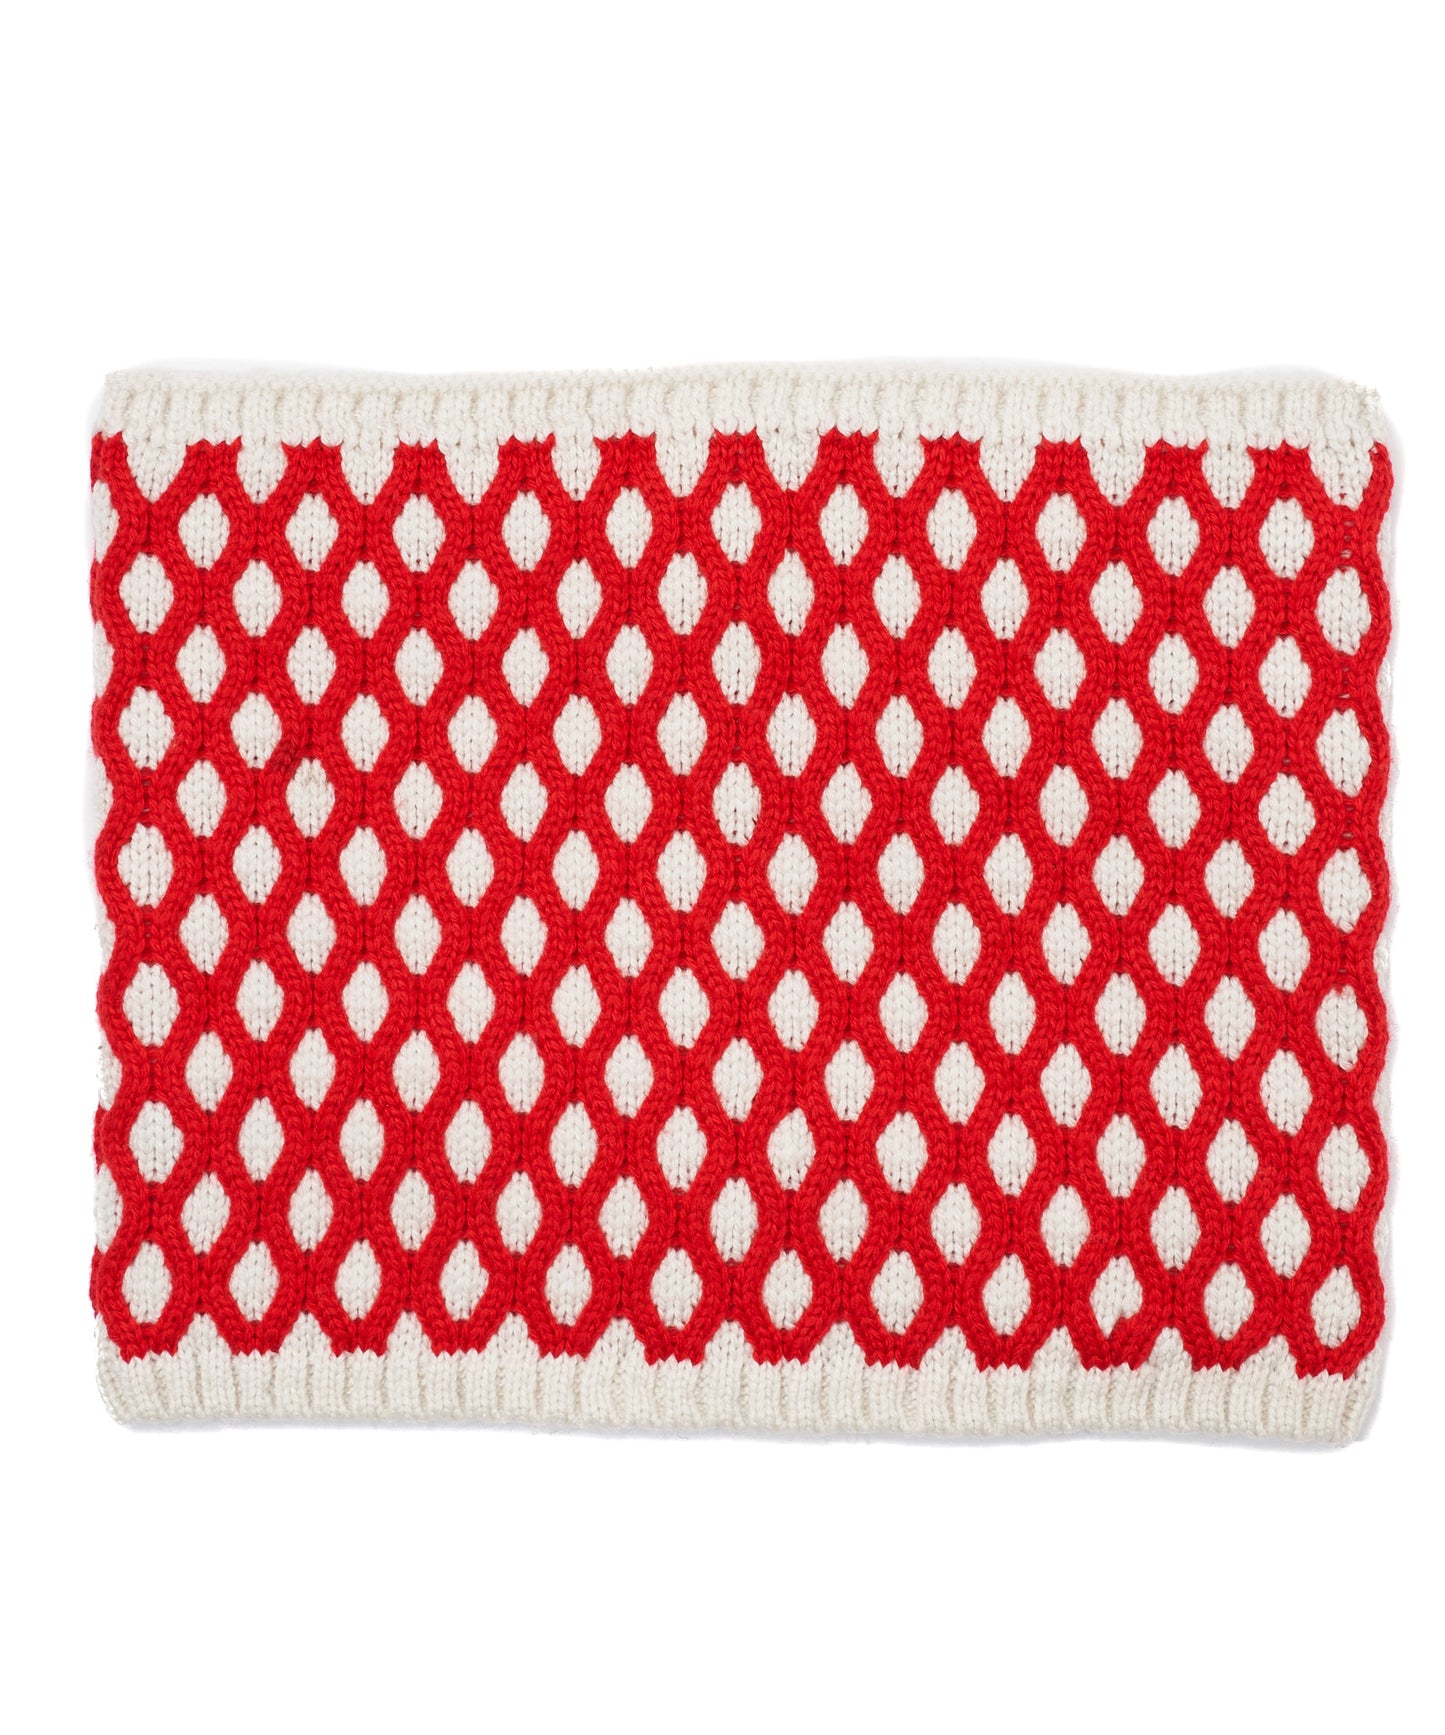 Recycled Bi-color Honeycomb Neck Warmer in color Ivory